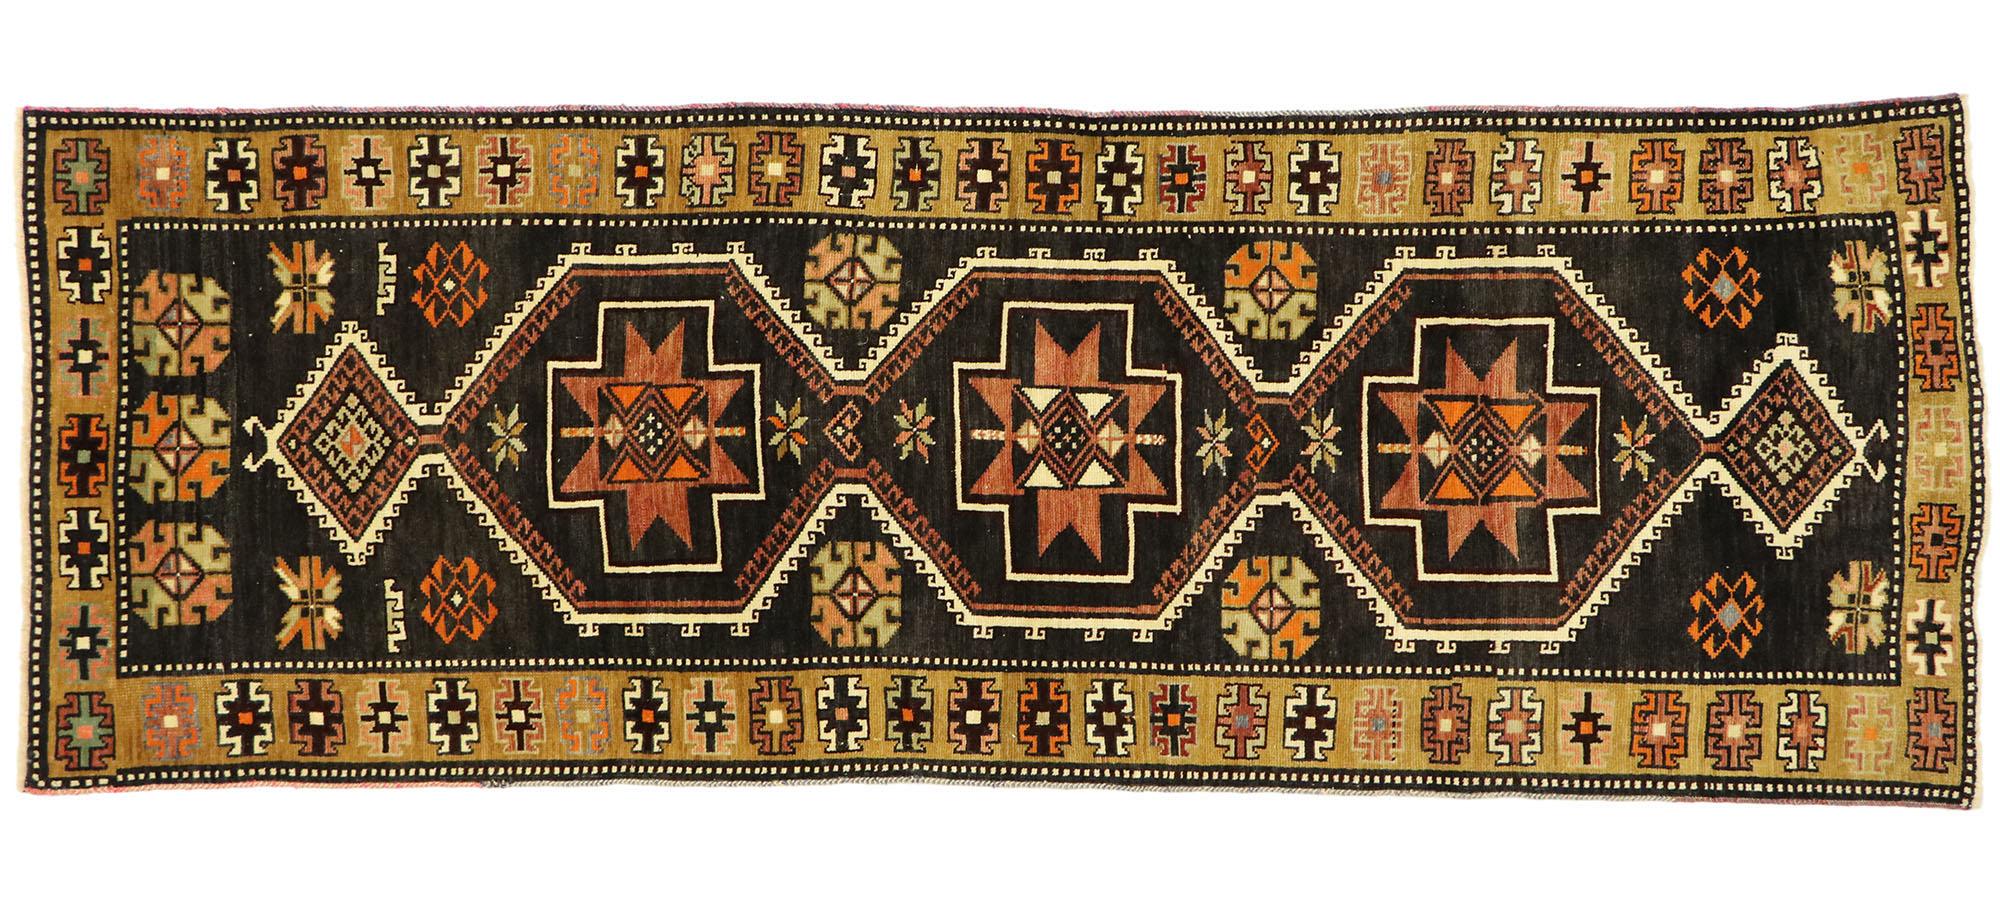 76979 Vintage Turkish Oushak Runner with Mid-Century Modern Style 03'02 x 08'03. Full of character and stately presence, this vintage Turkish Oushak runner with Modern Tribal style showcases an extravagant geometric design. This Oushak runner is